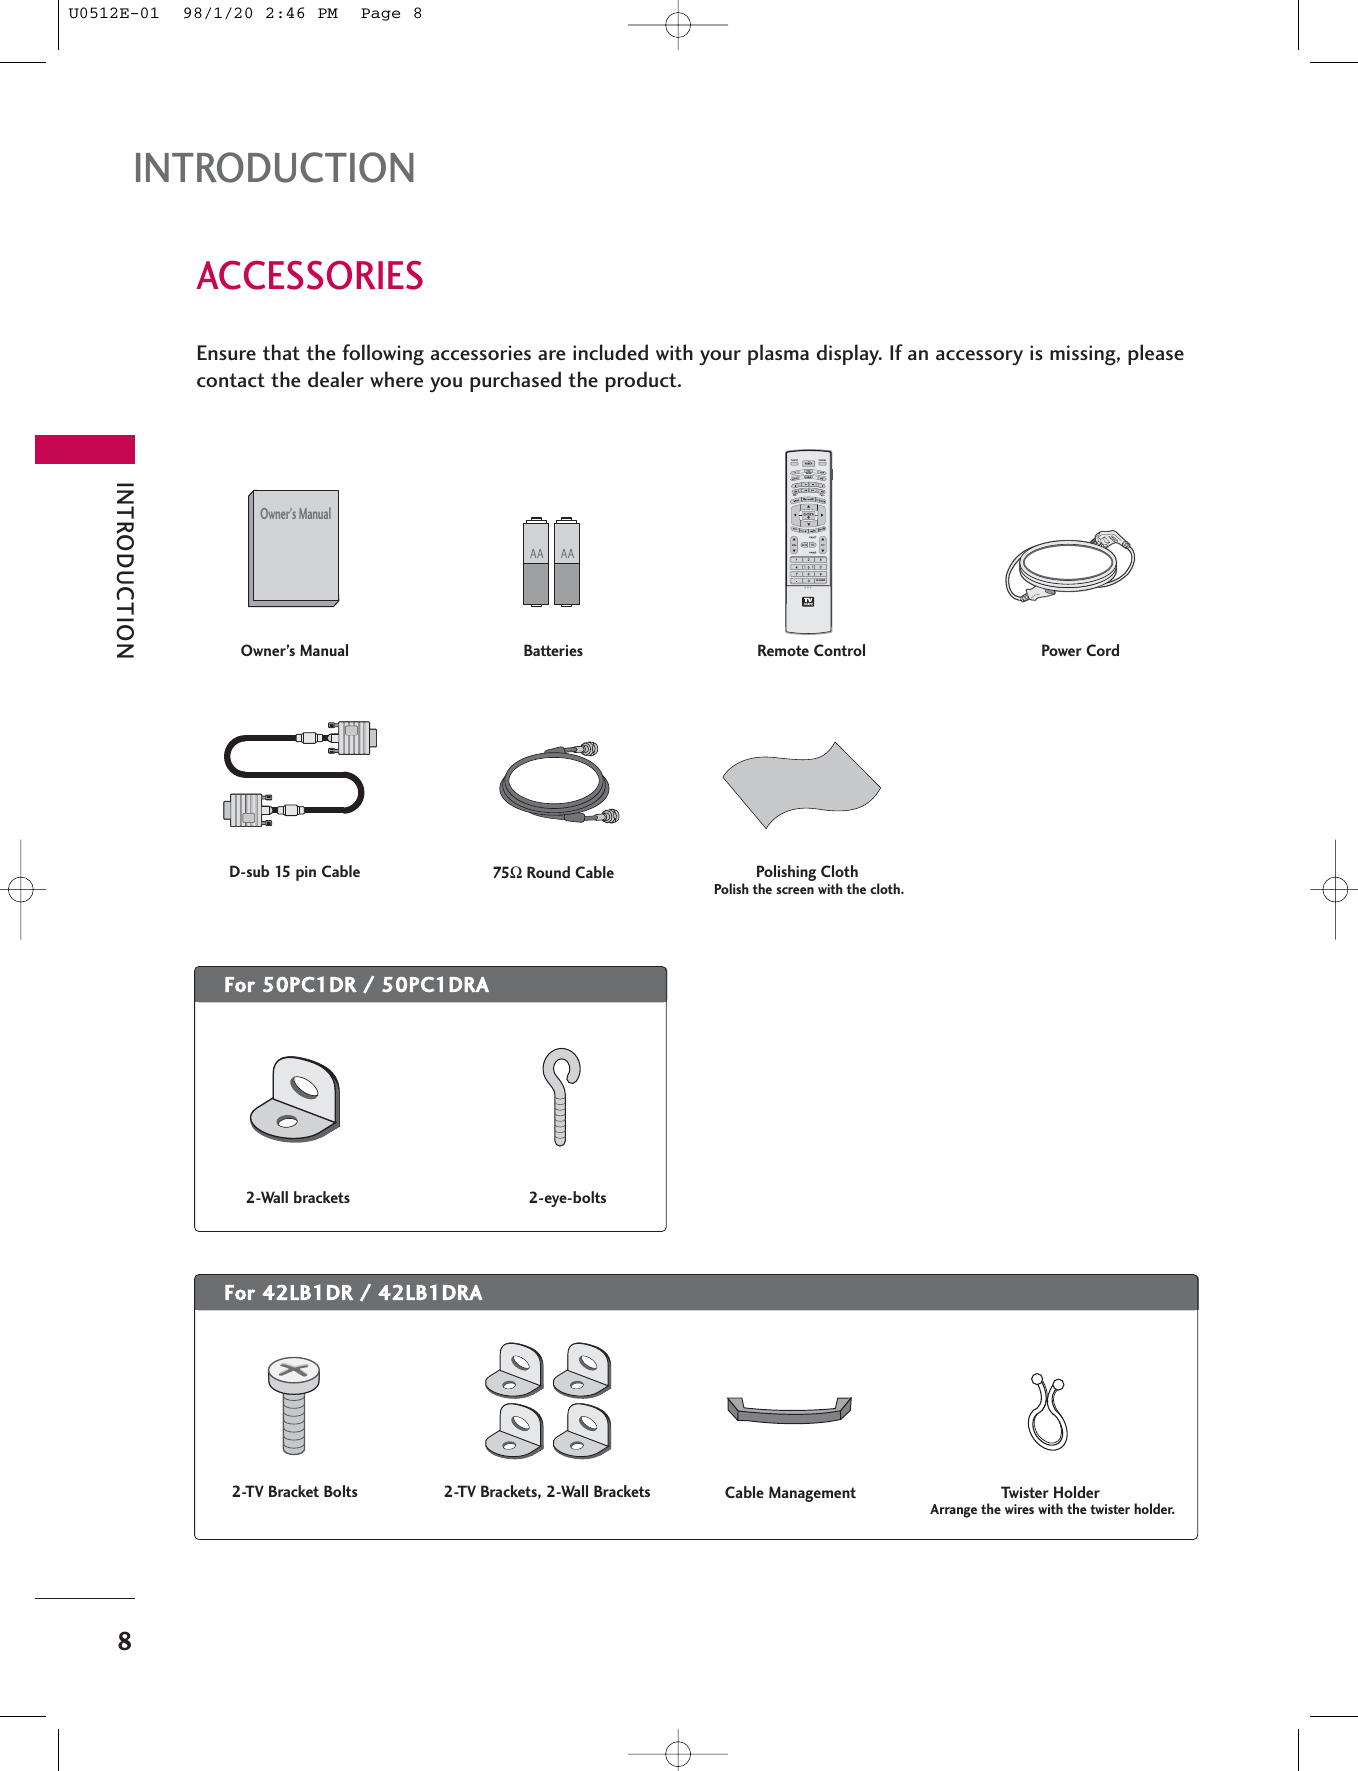 INTRODUCTION8ACCESSORIESINTRODUCTIONEnsure that the following accessories are included with your plasma display. If an accessory is missing, pleasecontact the dealer where you purchased the product.MODEDAY -DAY+FLASHBKAPMCCAUTO DEMOM/C EJECTTV INPUT TV/VIDEOOwner&apos;s ManualOwner’s Manual BatteriesD-sub 15 pin Cable 75ΩRound CableRemote ControlPolishing ClothPolish the screen with the cloth.Power CordCable Management2-TV Bracket Bolts 2-TV Brackets, 2-Wall Brackets Twister HolderArrange the wires with the twister holder.2-Wall brackets 2-eye-boltsFor 42LB1DR / 42LB1DRA For 50PC1DR / 50PC1DRA U0512E-01  98/1/20 2:46 PM  Page 8